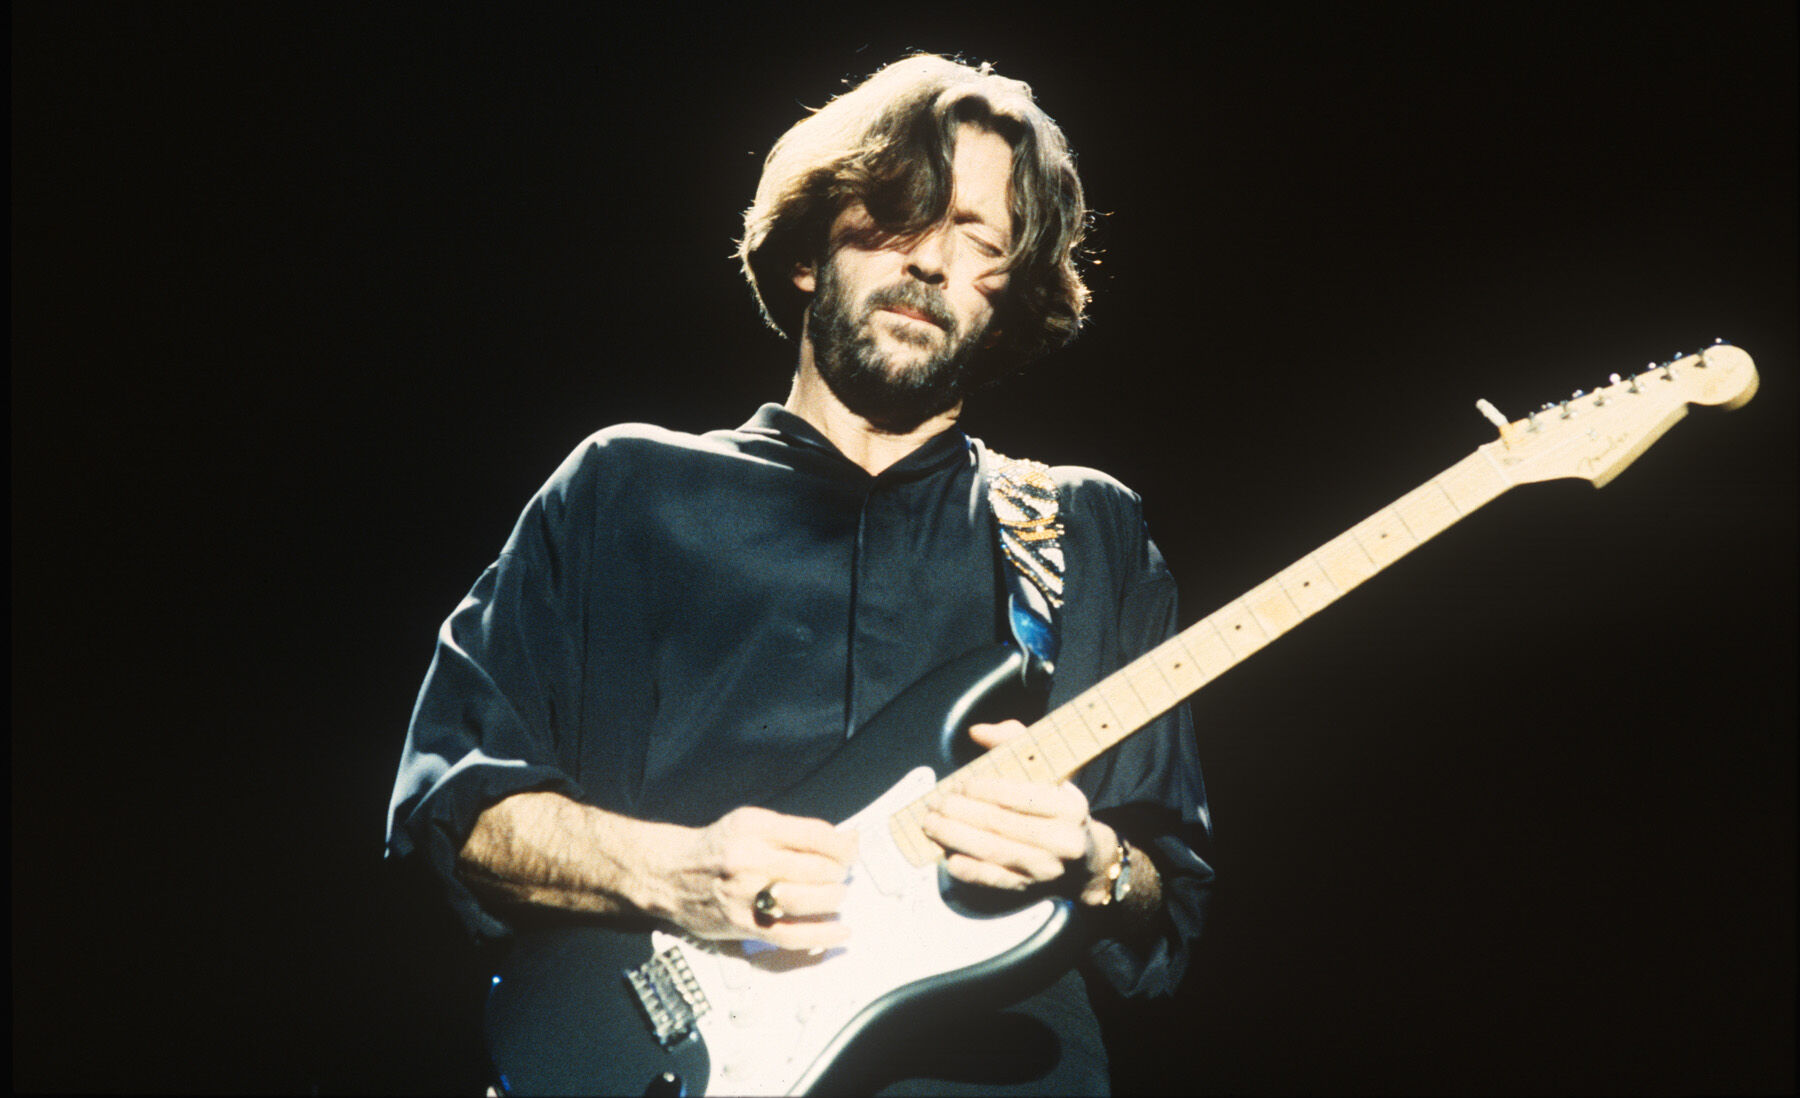 SIFF presents 'Eric Clapton: Across 24 Nights' May 17 & 21 | Kudos 